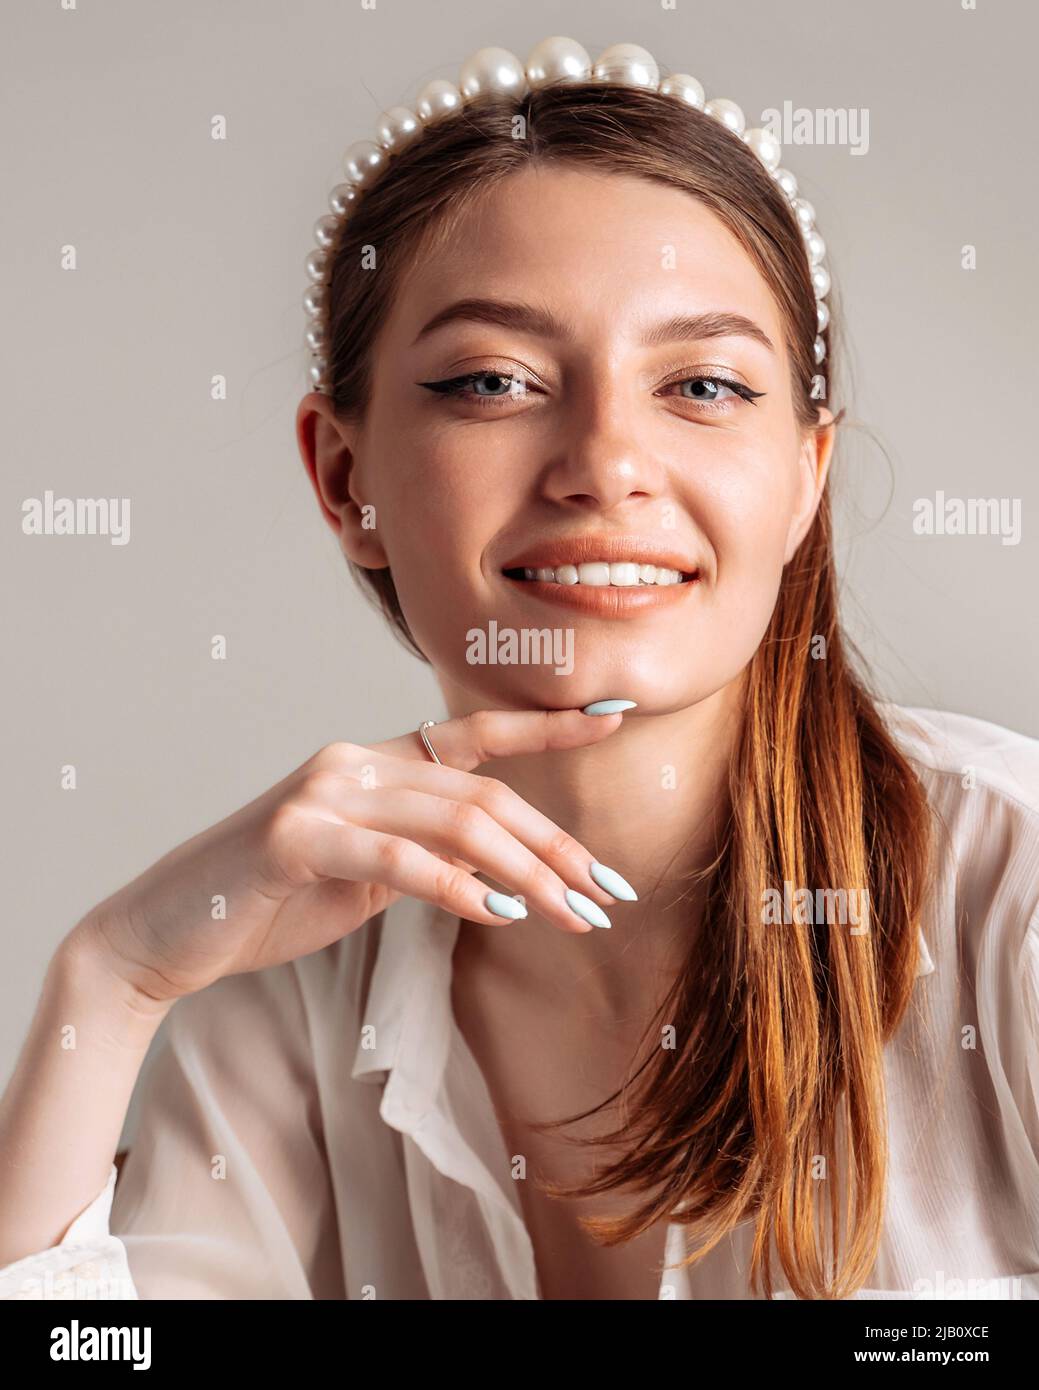 Portrait of a happy woman. Close up of woman in cheerful mood. Stock Photo